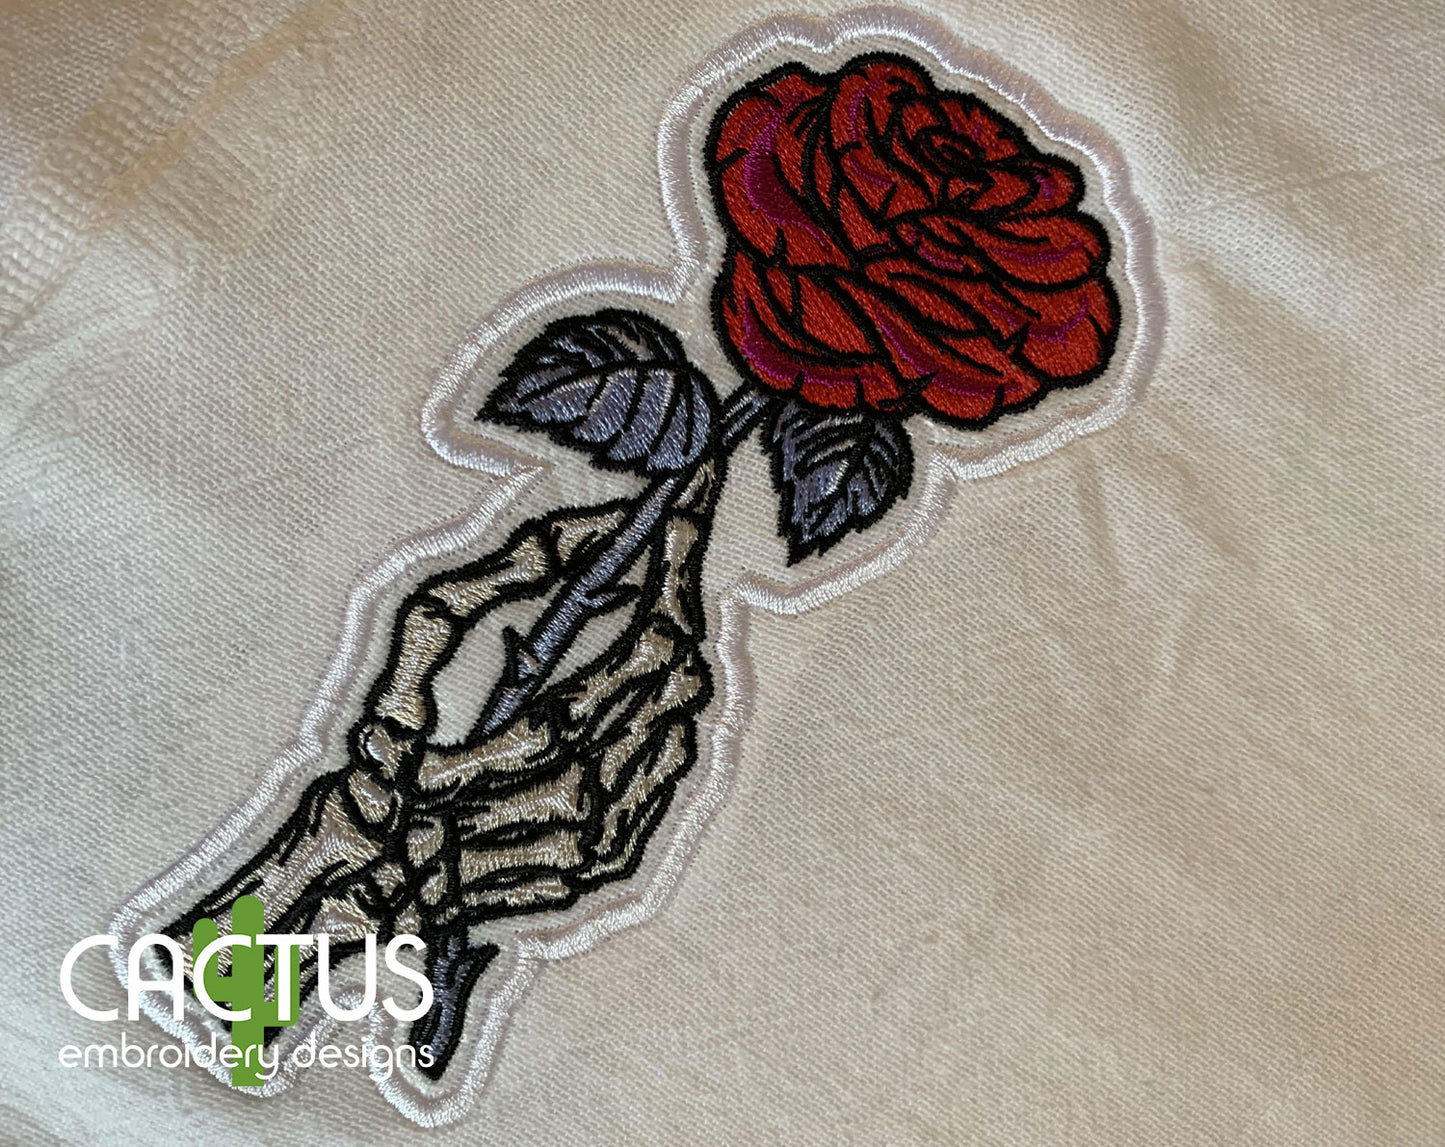 Skeleton Hand with Rose Patch Embroidery Design